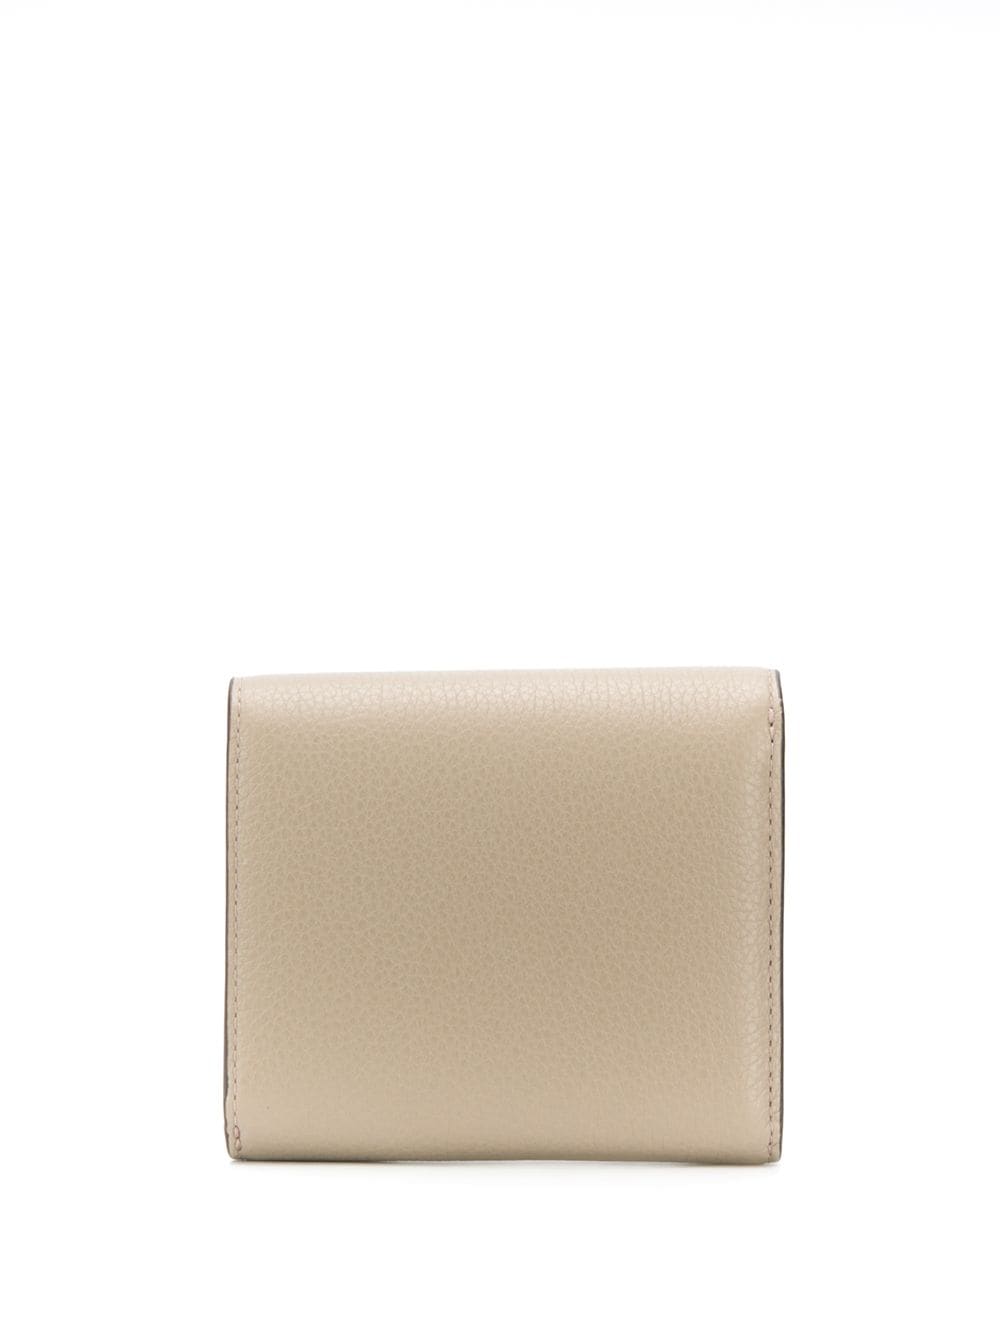 Mulberry Small French Wallet - Farfetch